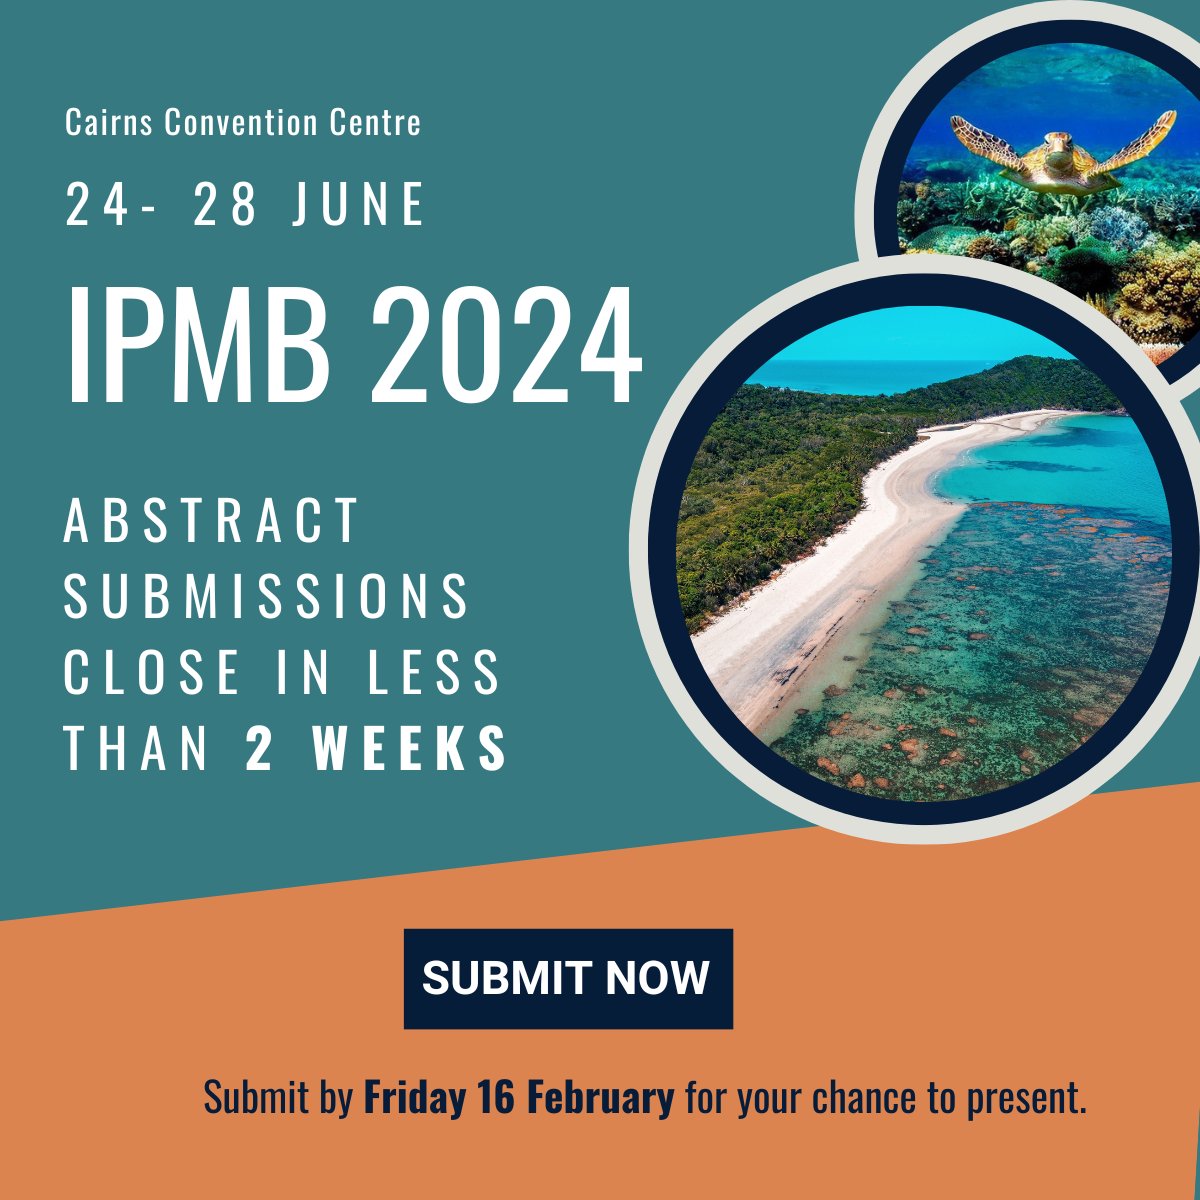 The beauty of tropical Queensland awaits... just two weeks to go until abstracts close for #IPMB2024 ipmb2024.org/registration